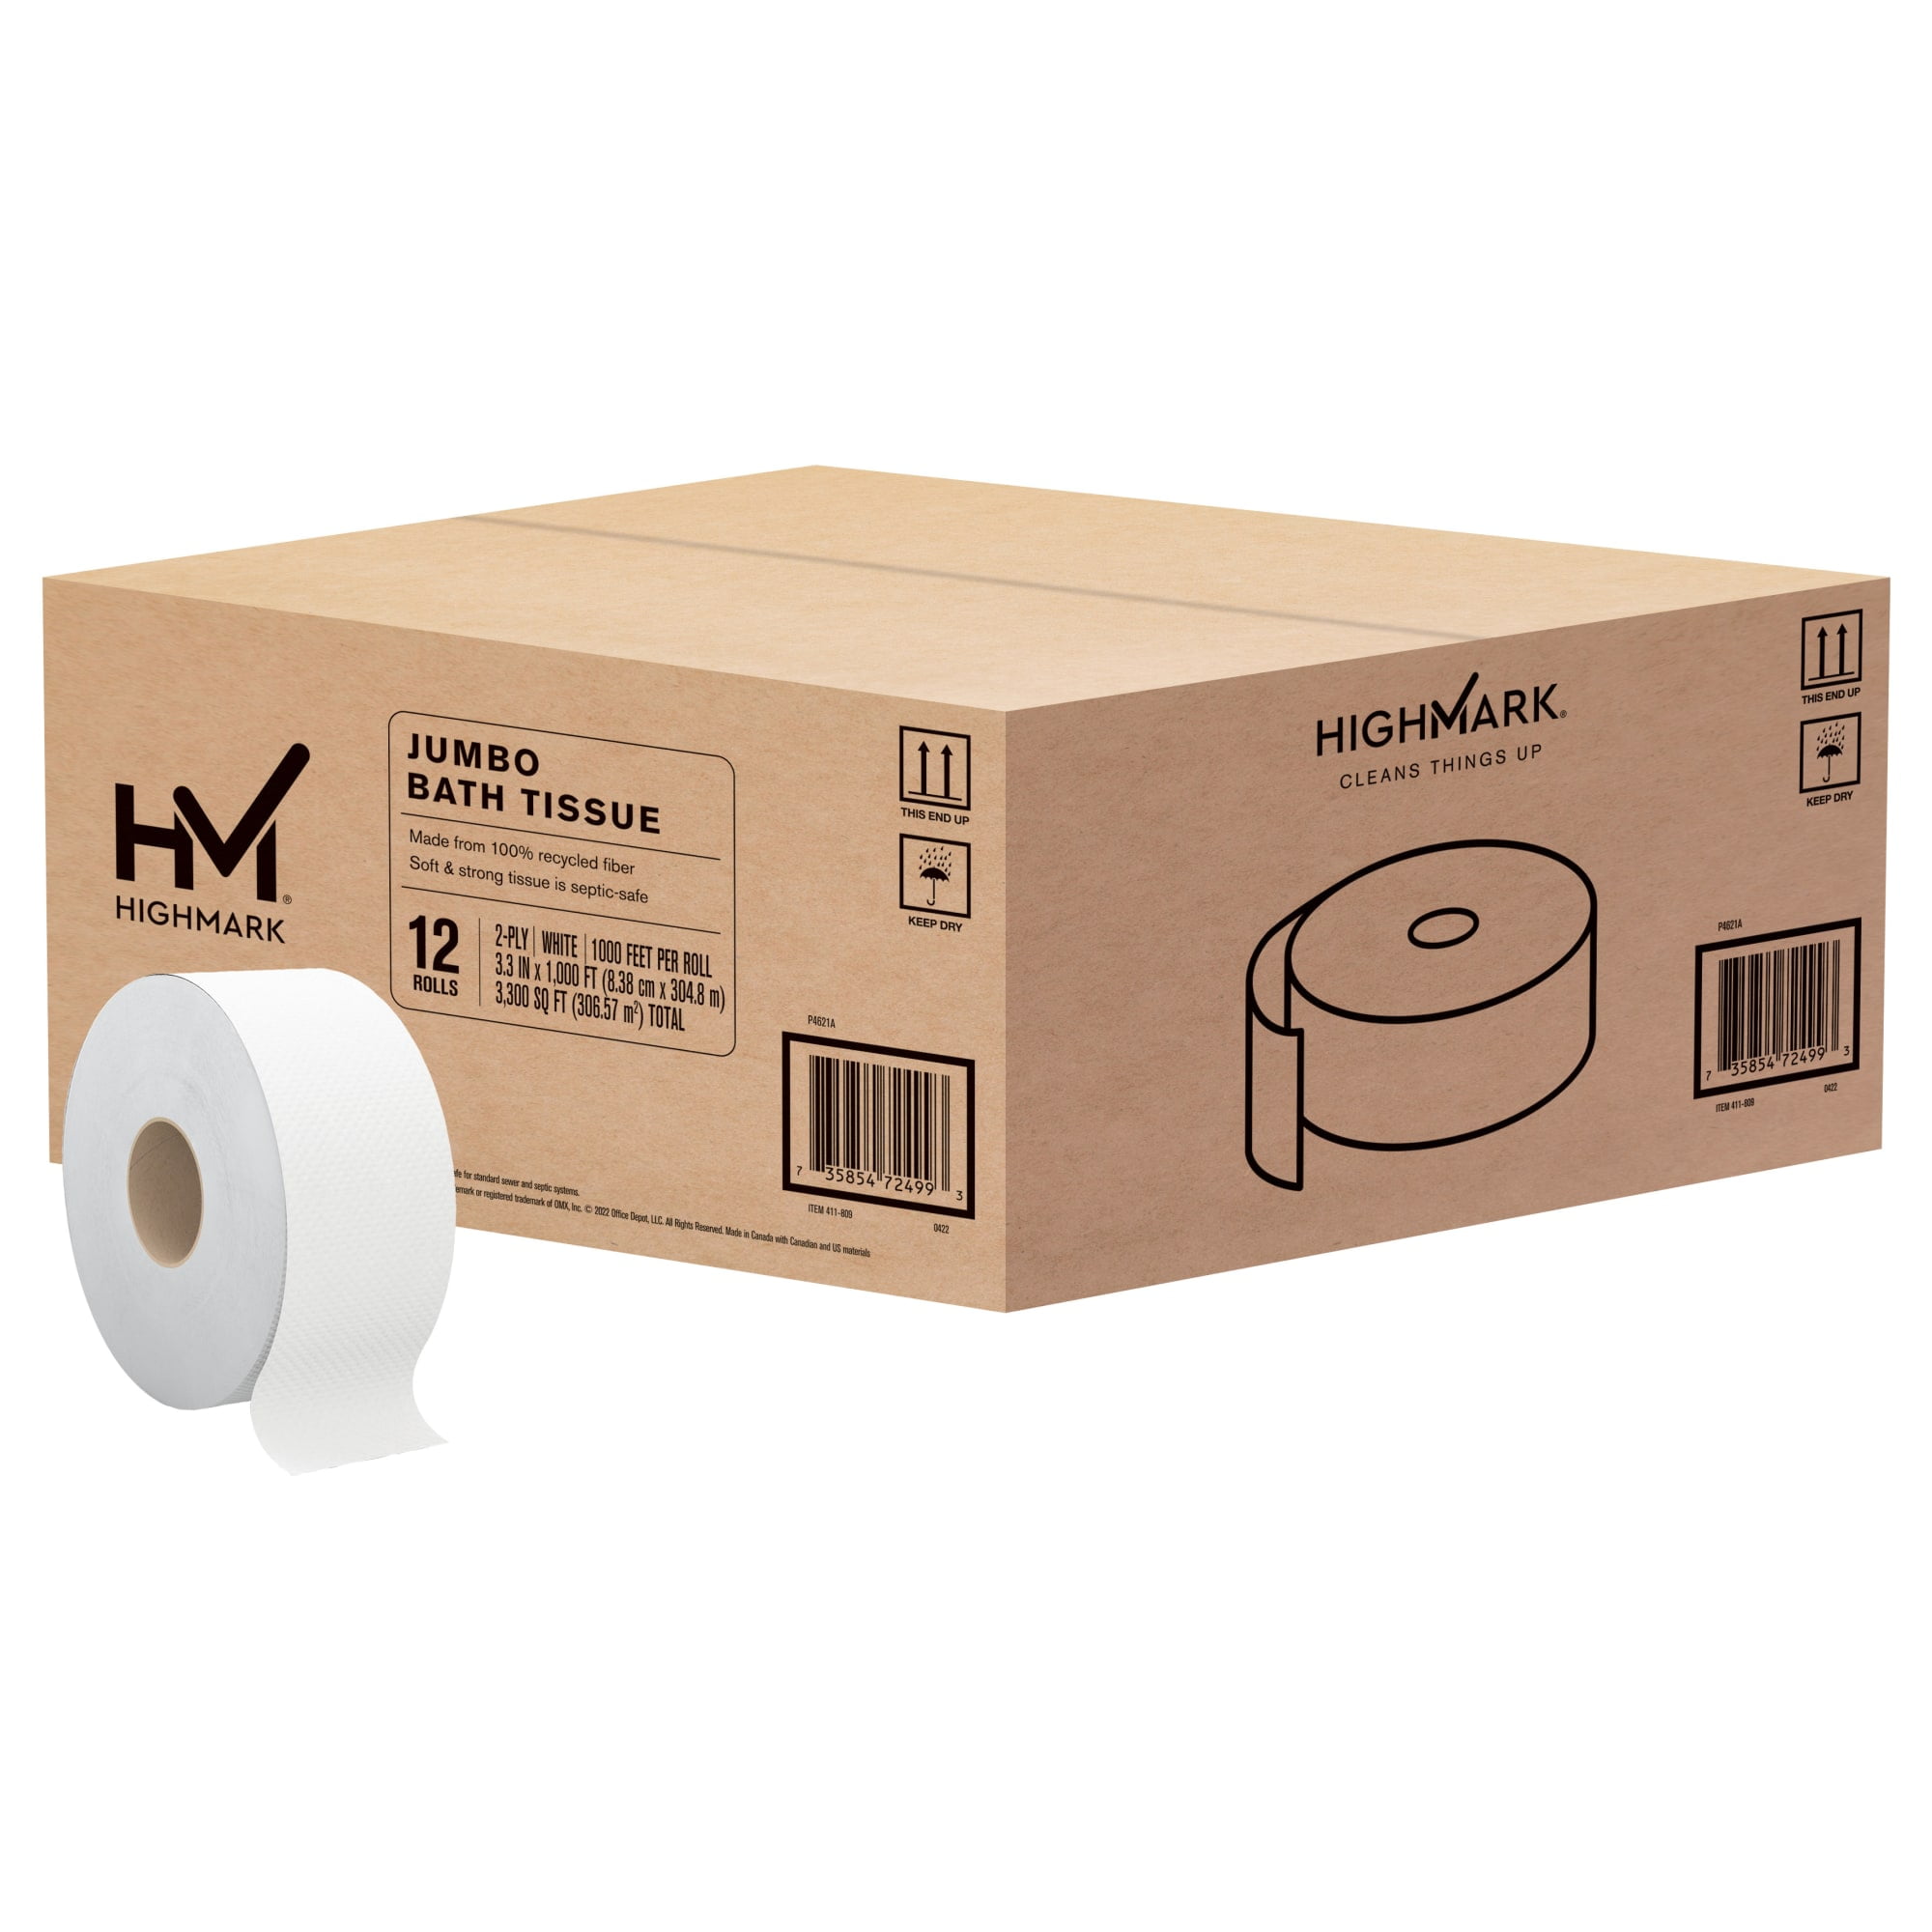 Georgia-Pacific Preference White 2-Ply Embossed Bathroom Tissue (80 Rolls)  GPC1828001 - The Home Depot